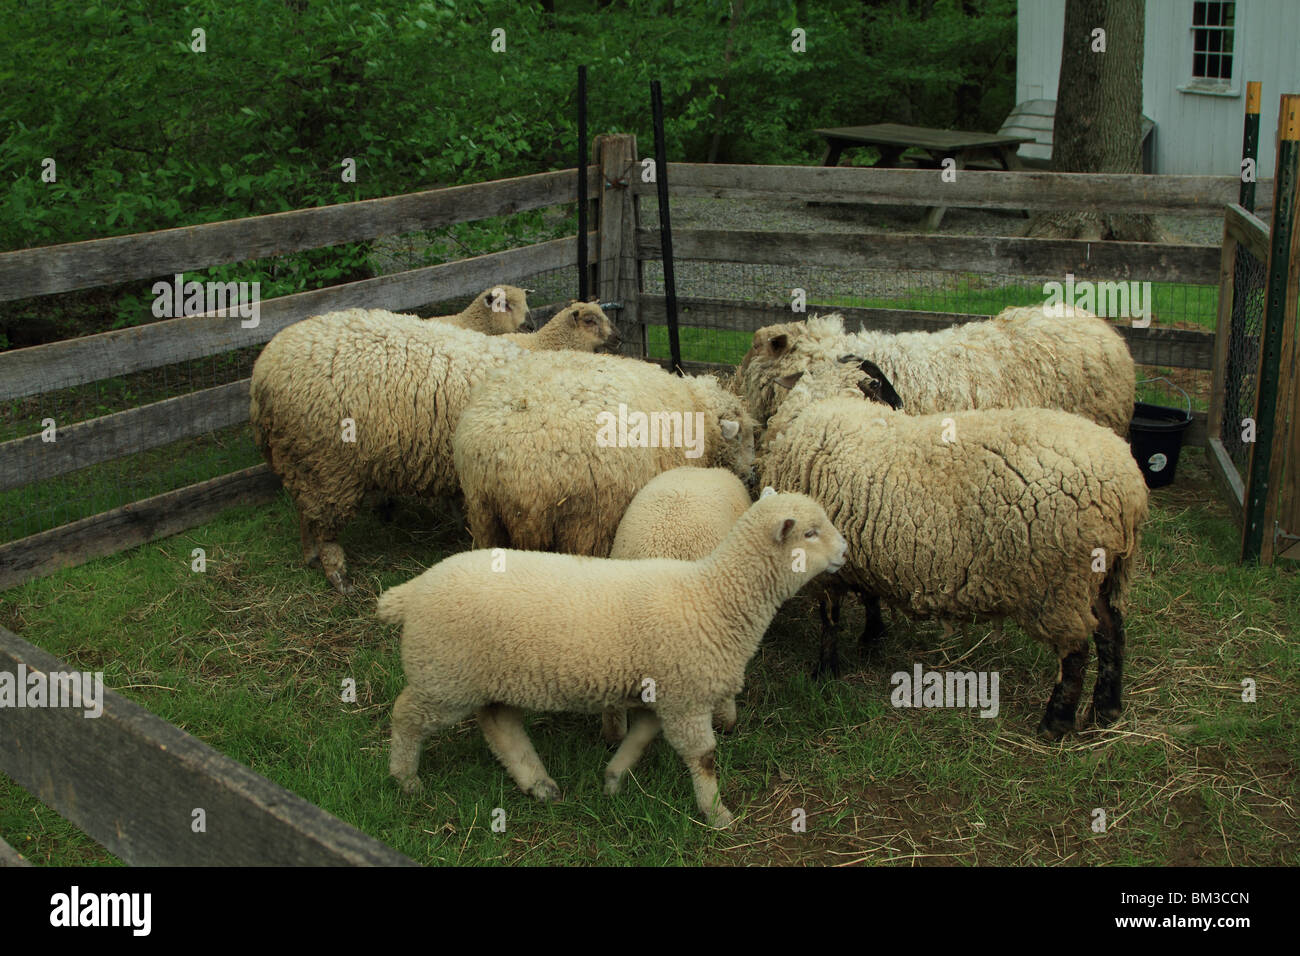 Herd of sheep in a pen. Stock Photo